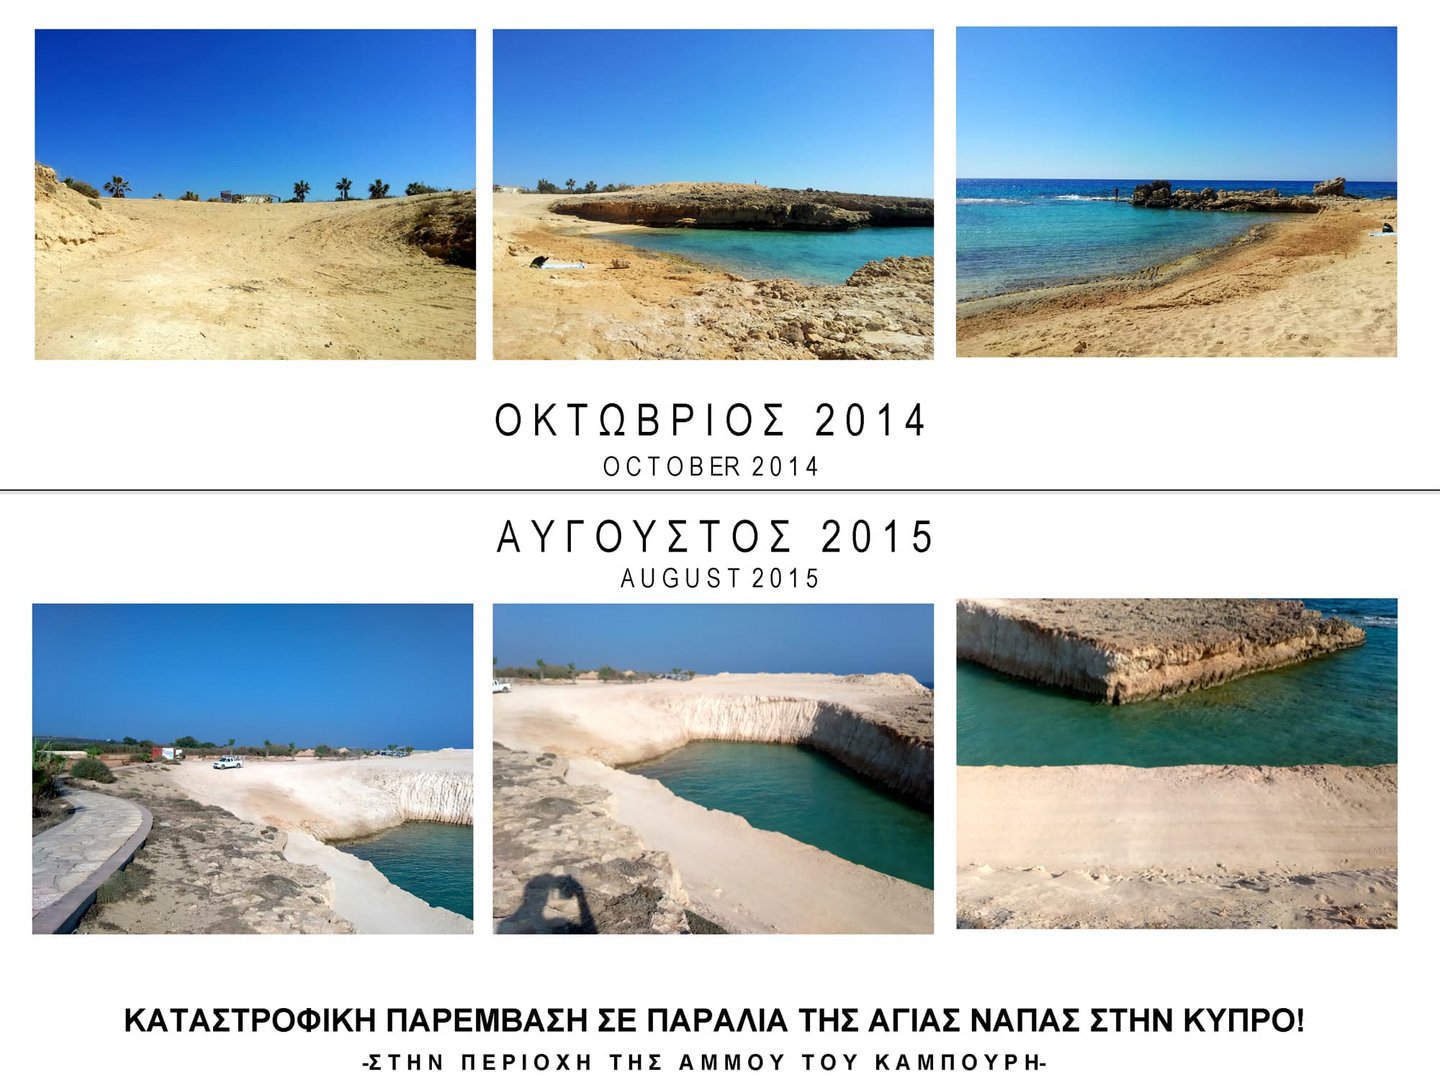 image Environmental damage at Ammos Kambouri beach sparks committee report